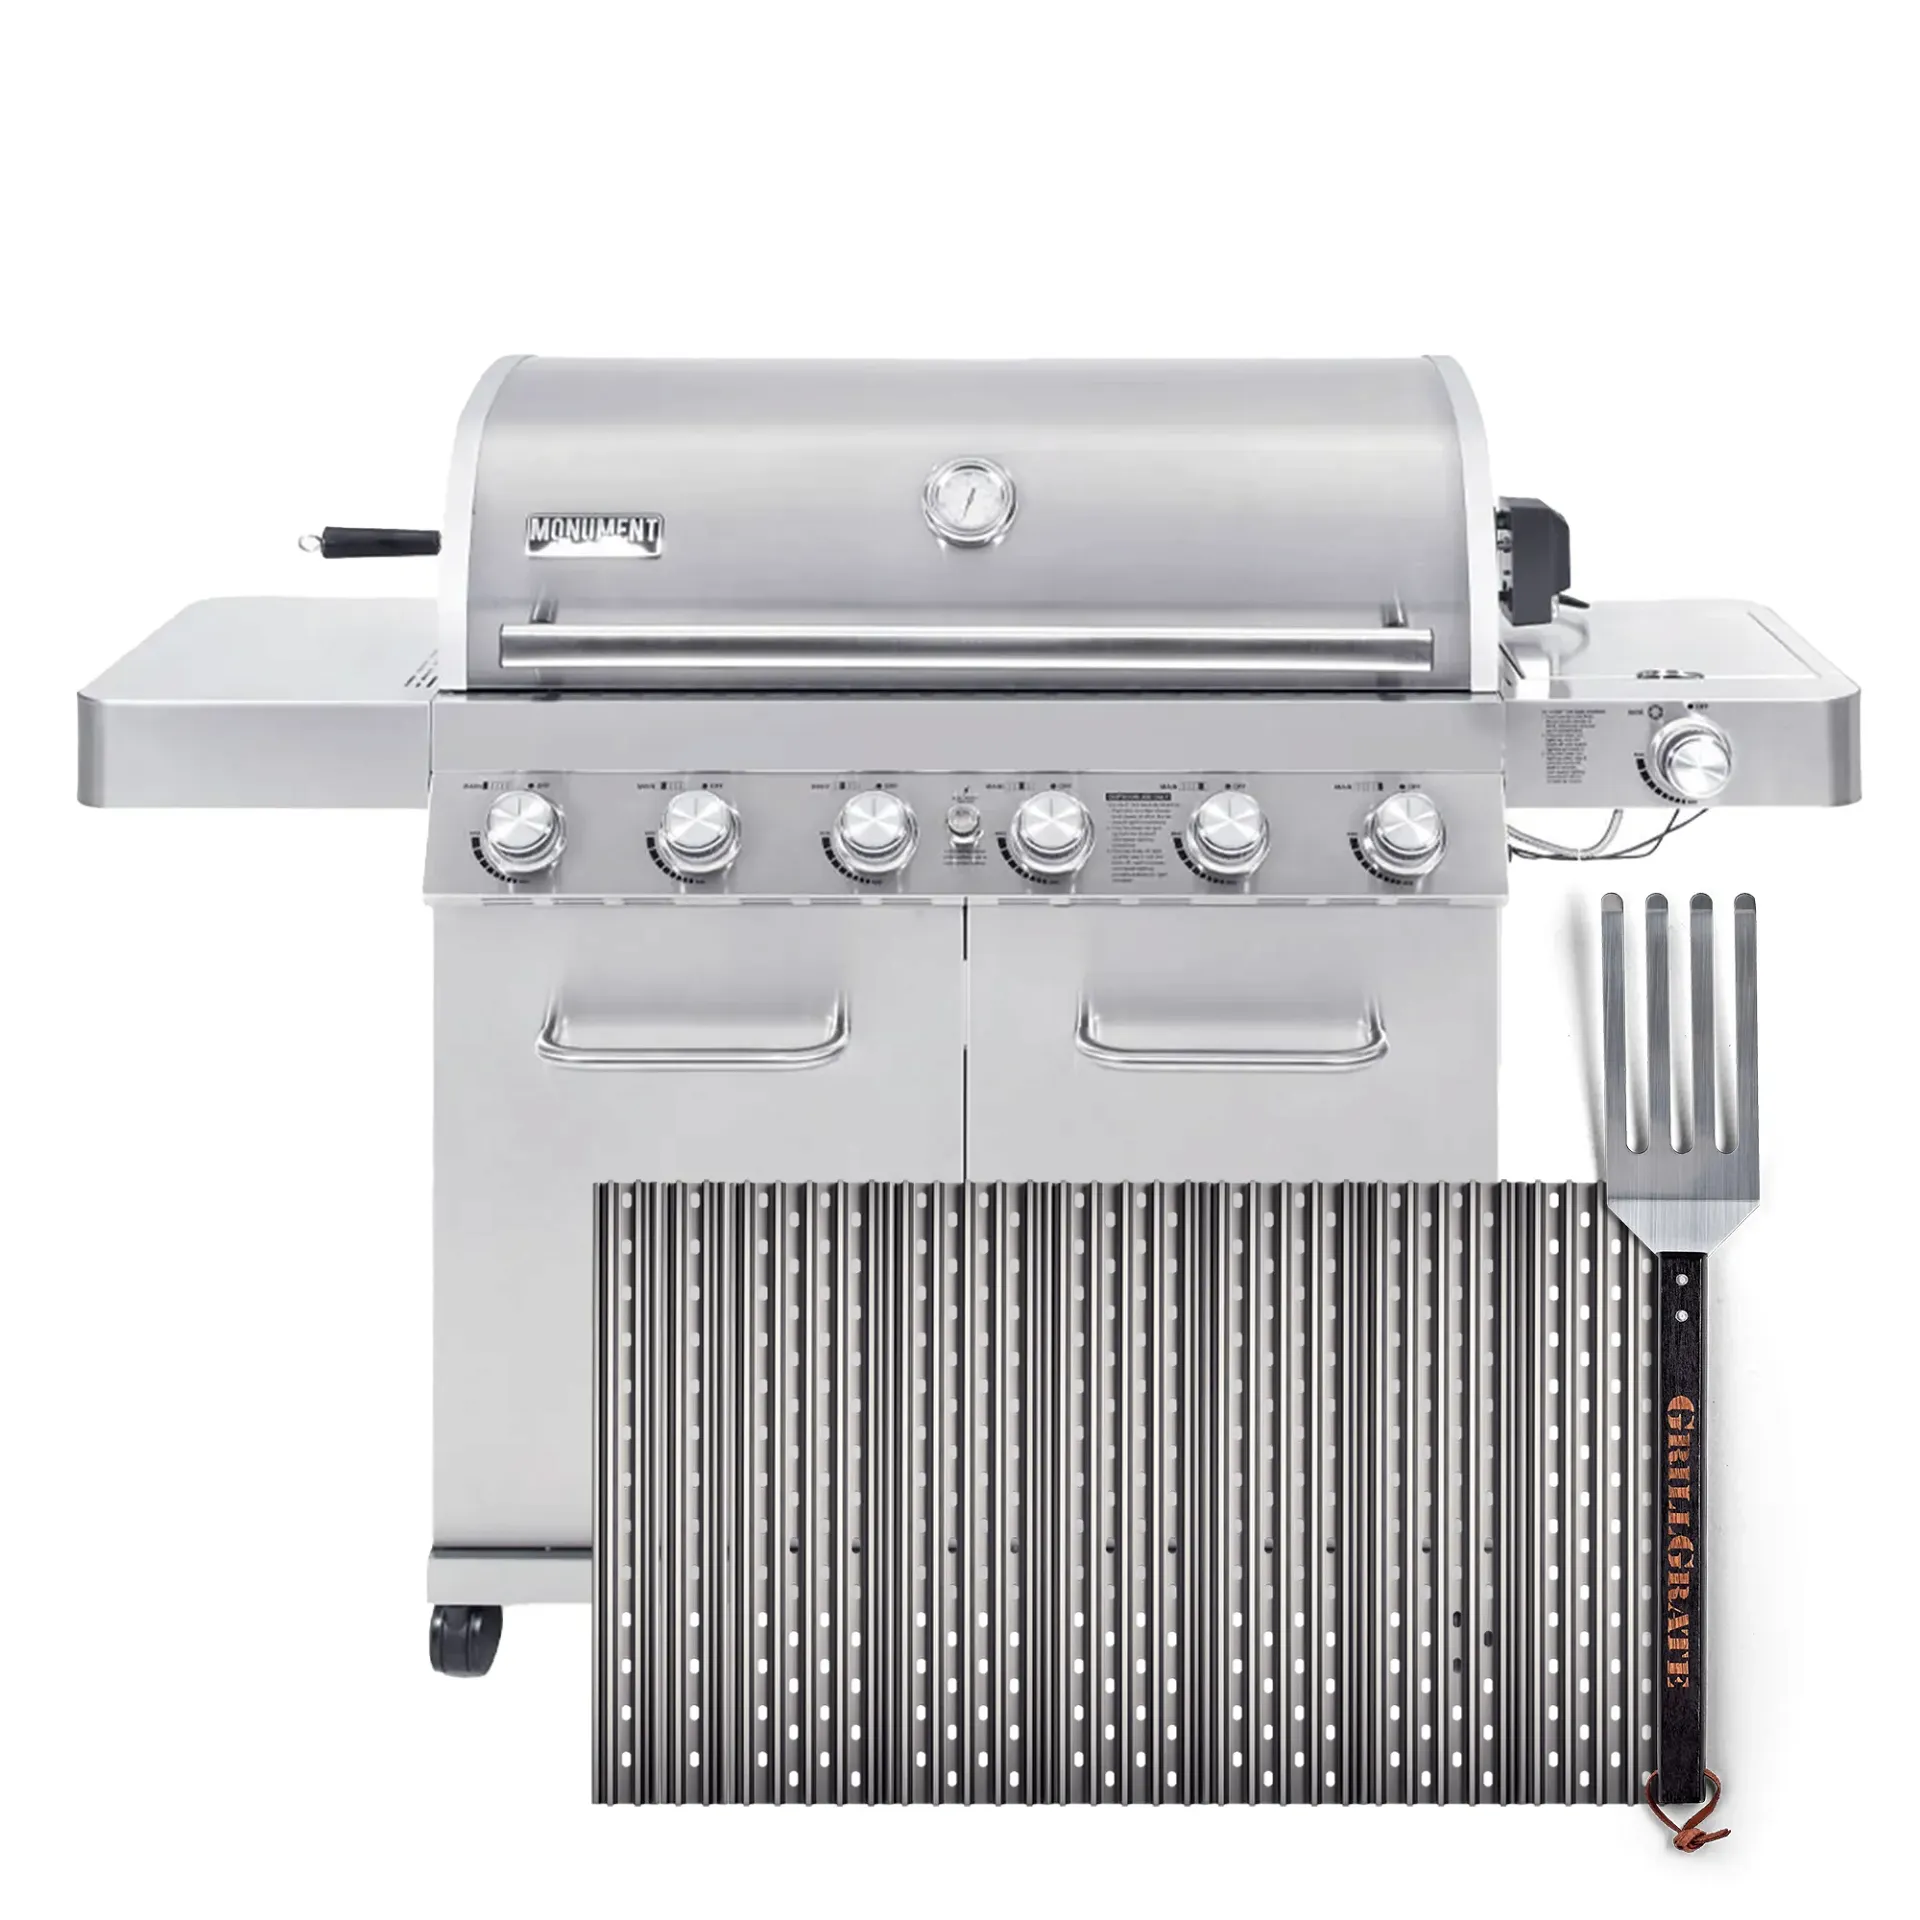 Replacement GrillGrate Set for Monument Grills 77352 - Stainless 6-Burner  LED Propane Gas Grill